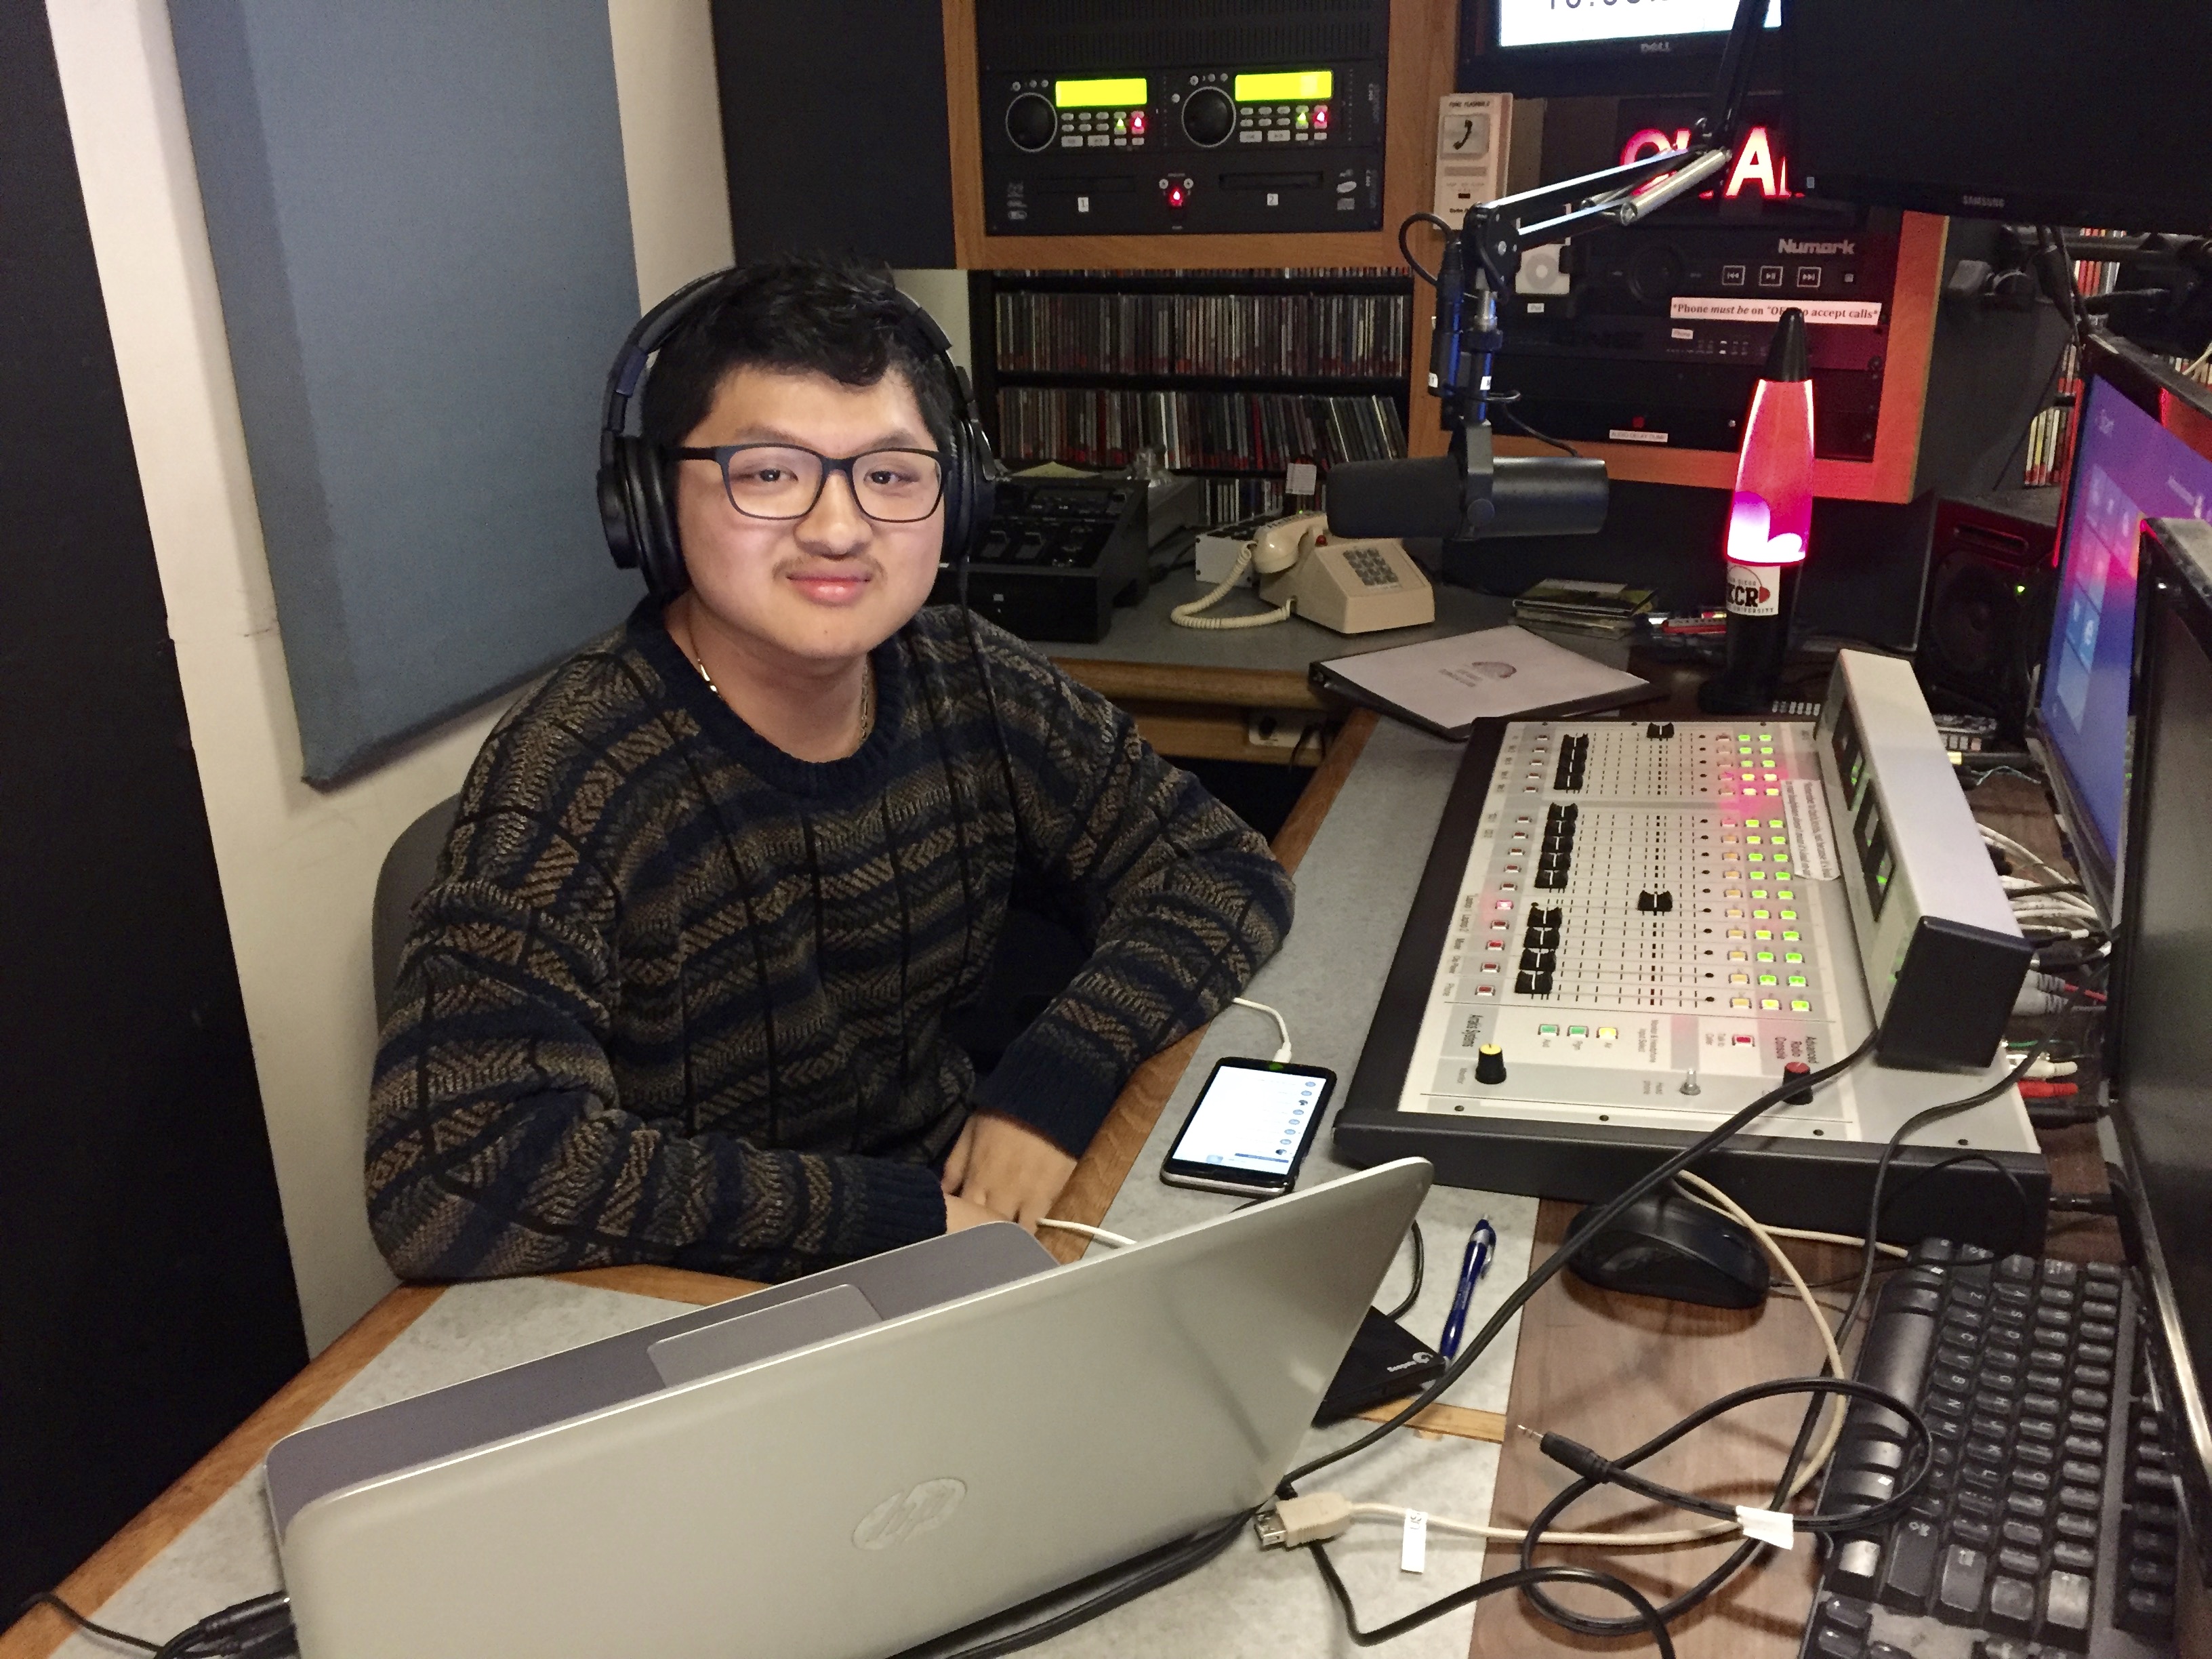 Christian Le, a music DJ at KCR, begins his playlist for the night in the studio.